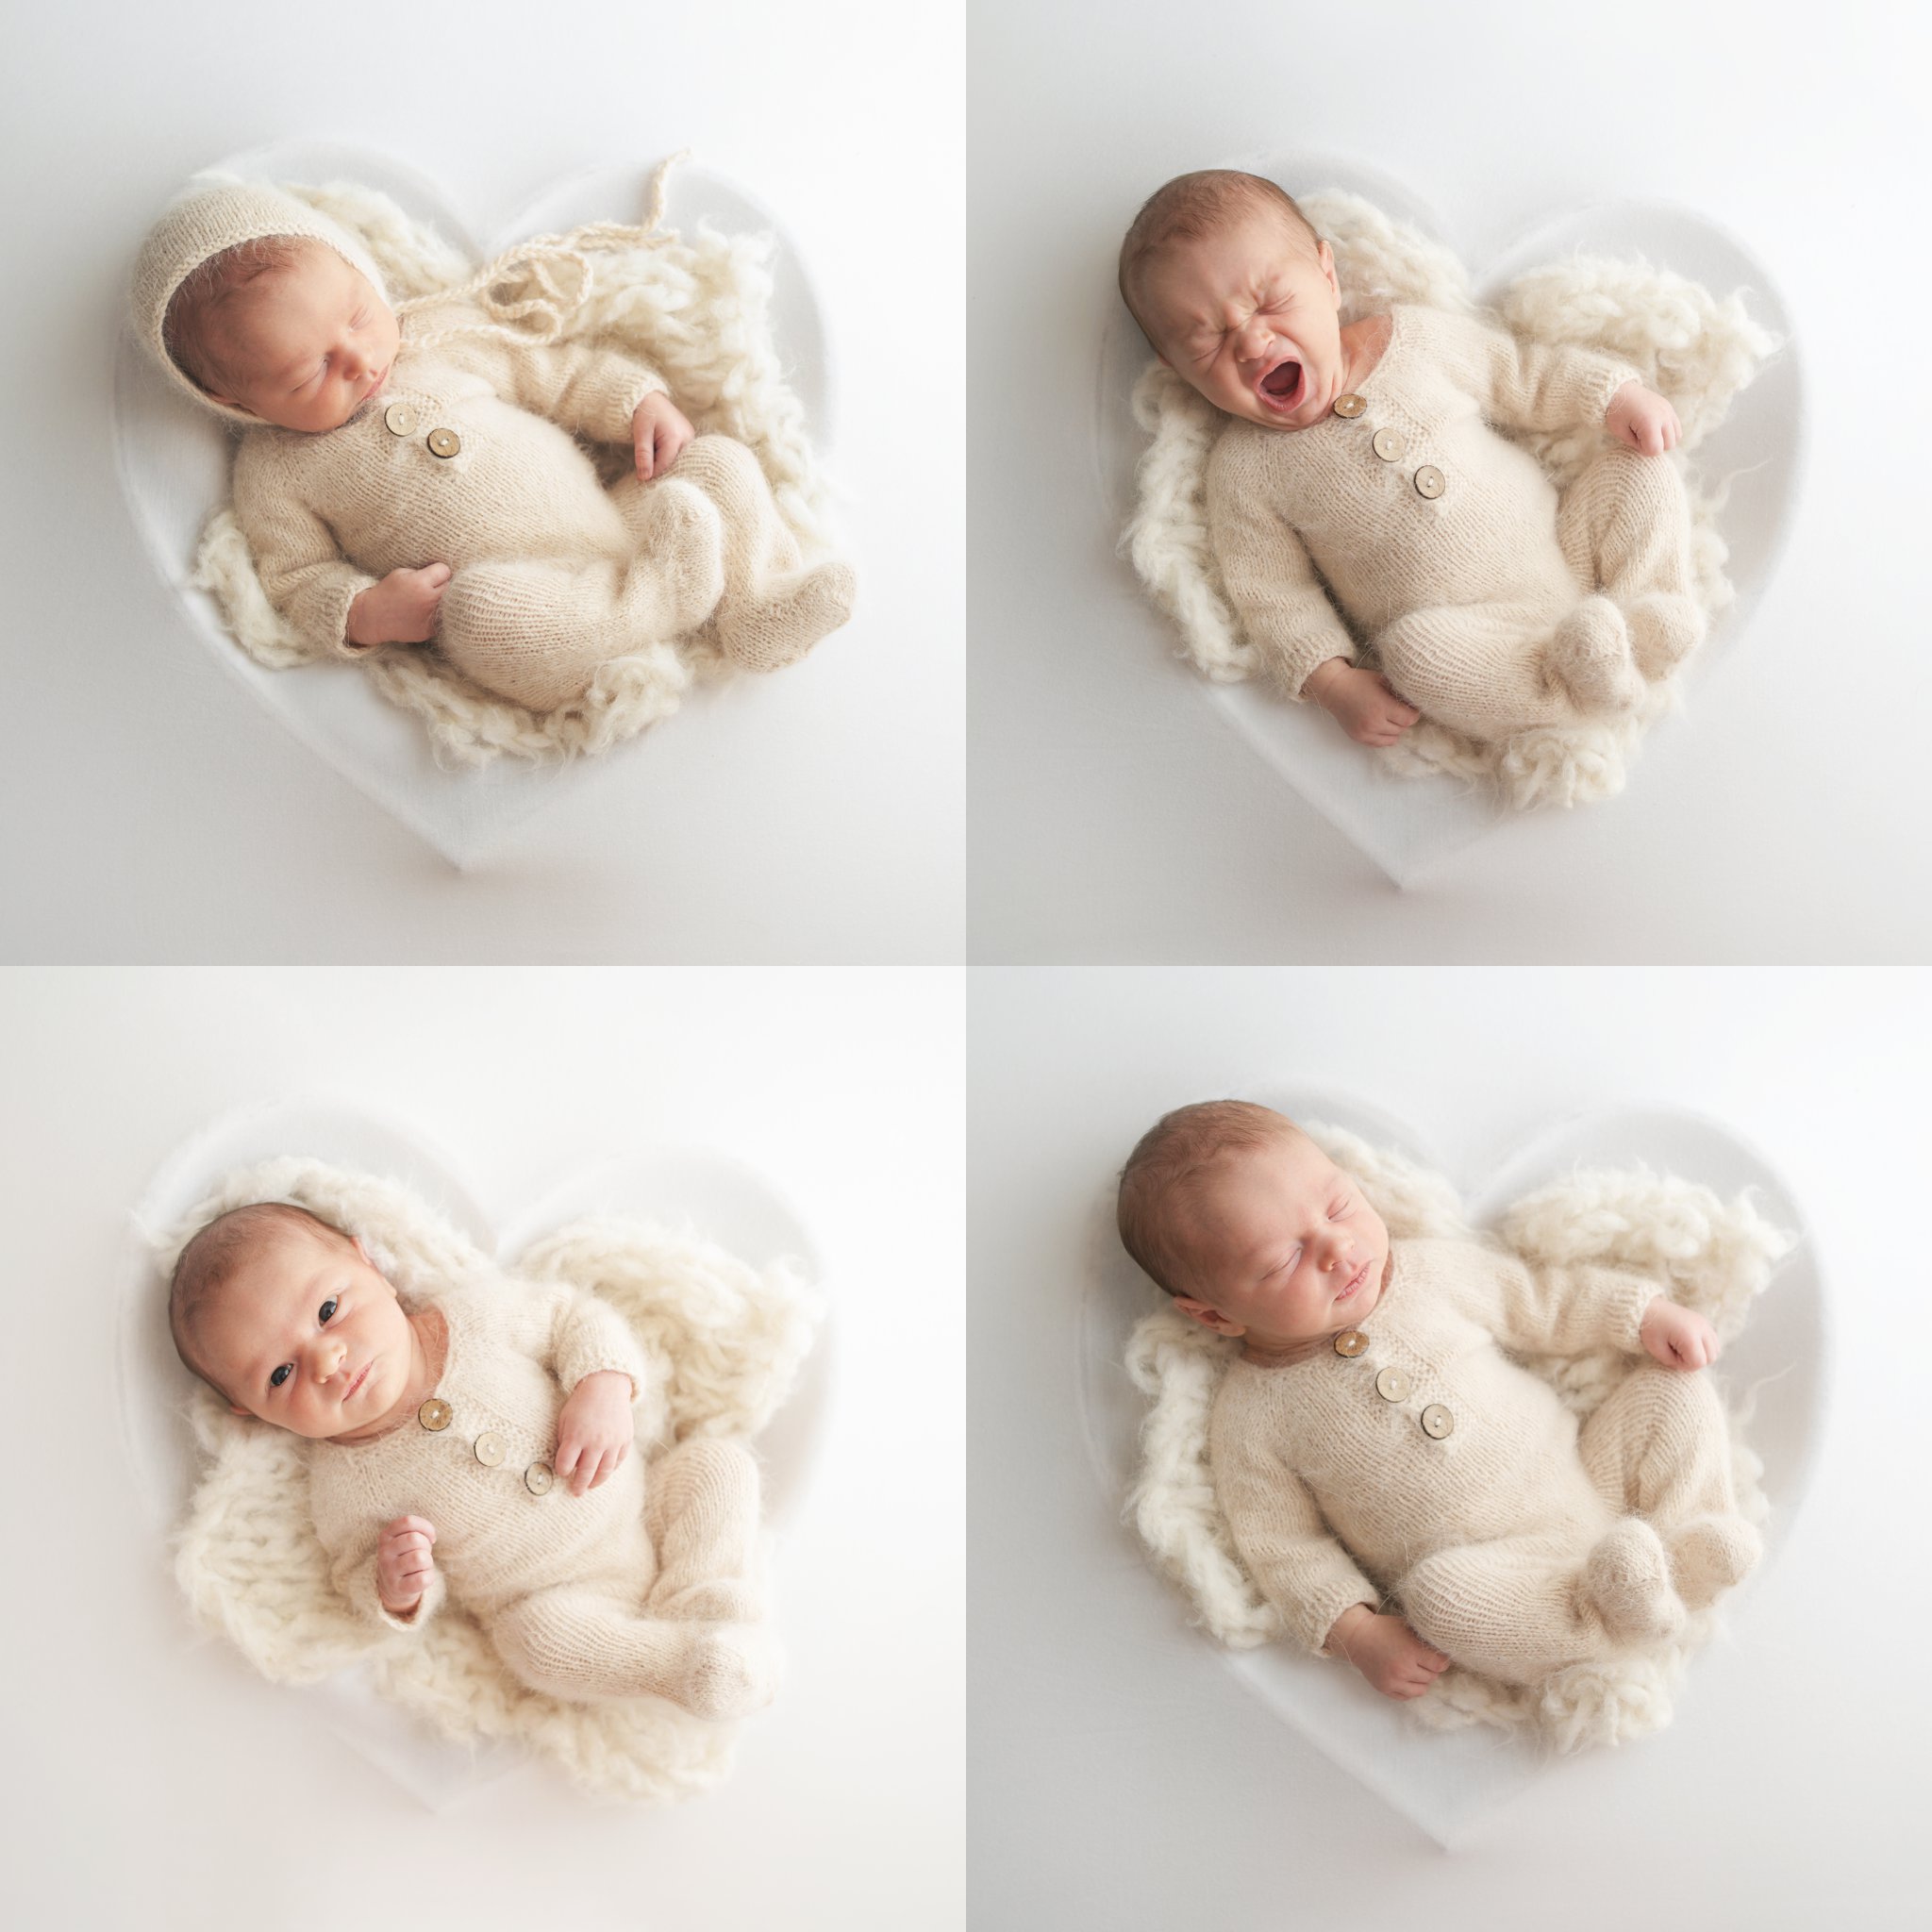 10 day old newborn being photographed in cream outfit laying in a heart shaped bowl.